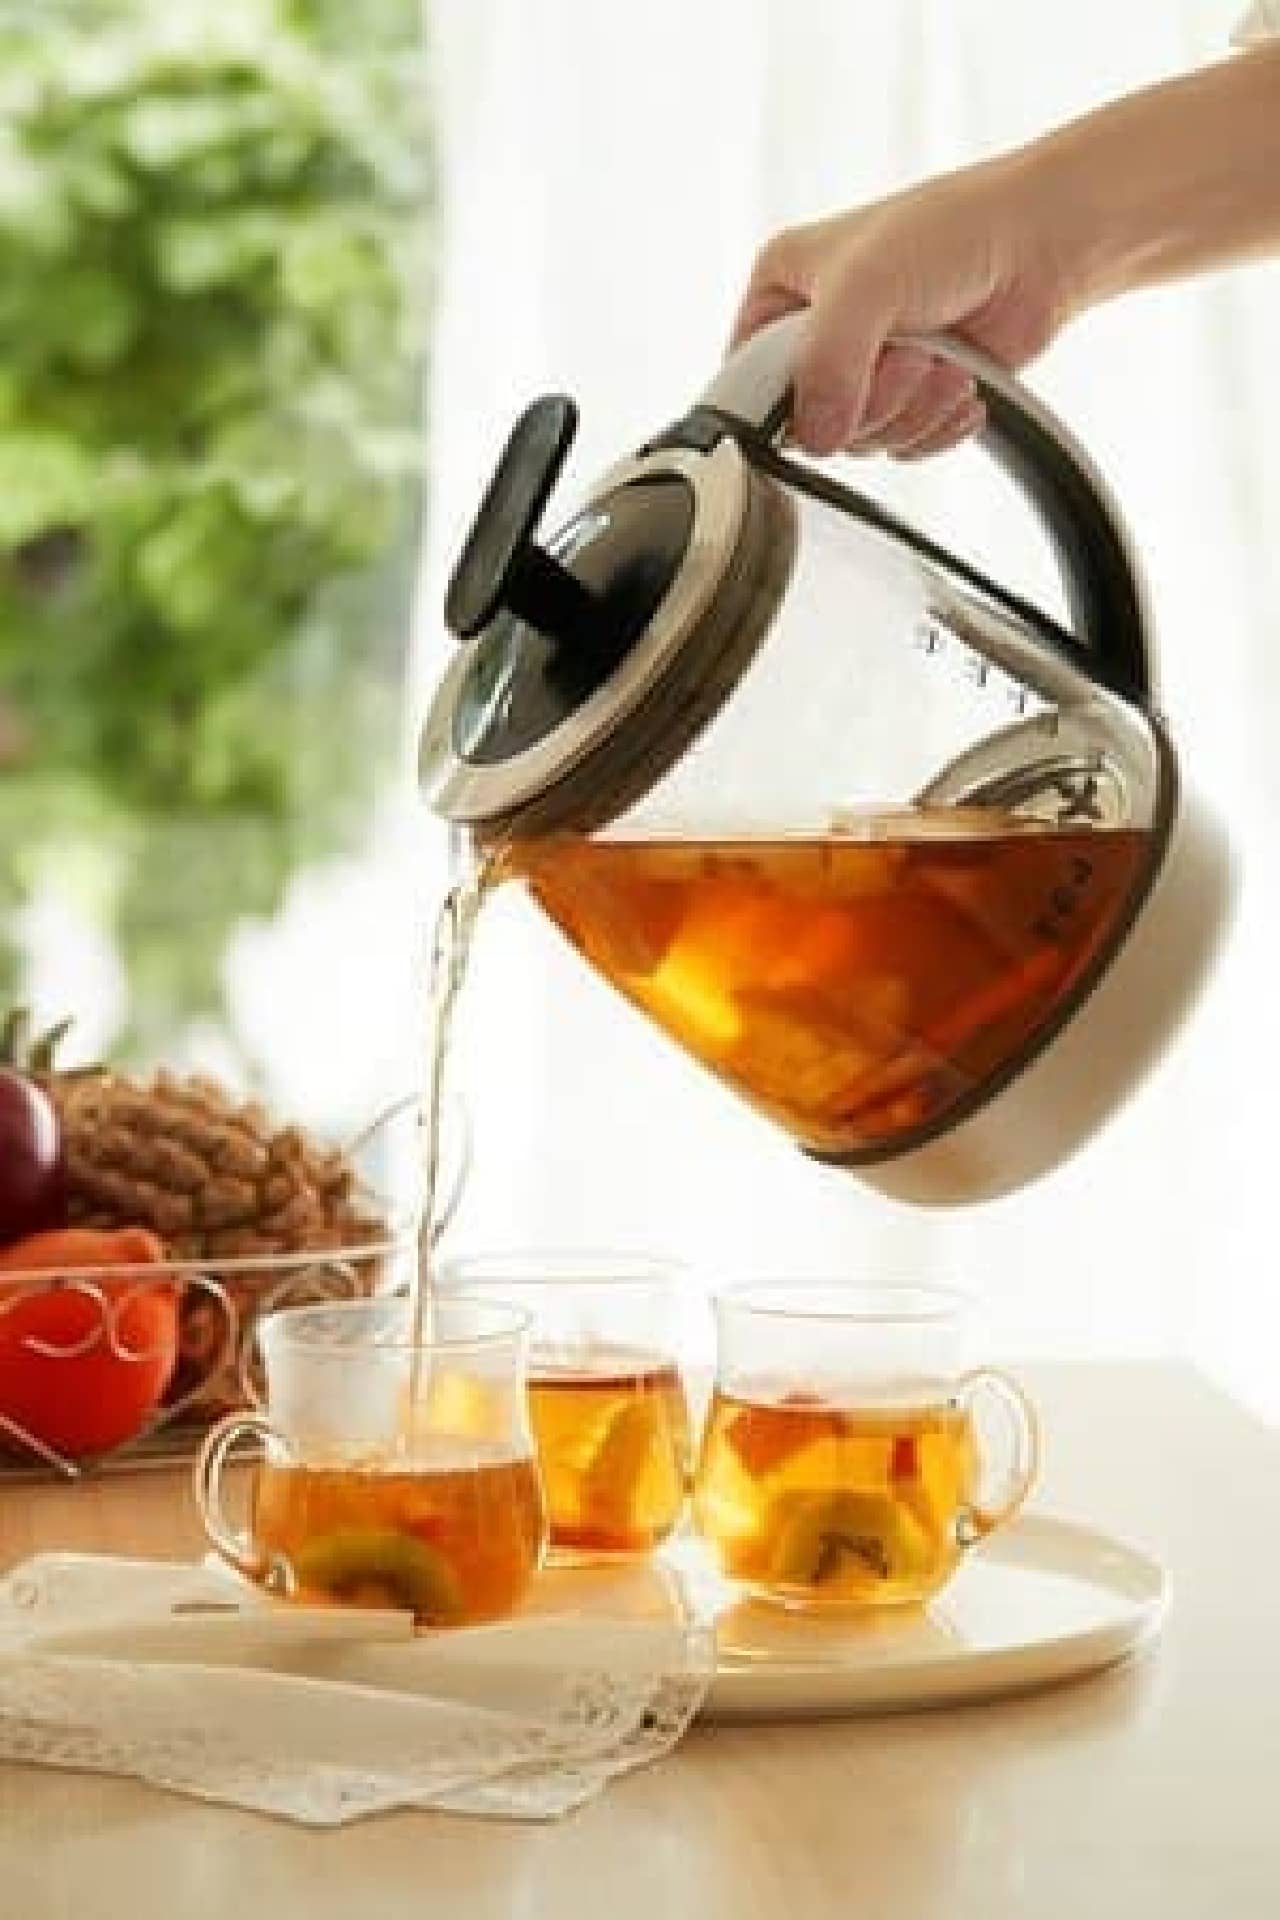 Tefal's new electric kettle "Teiere 1.5L" with teapot that can also be used as a teapot